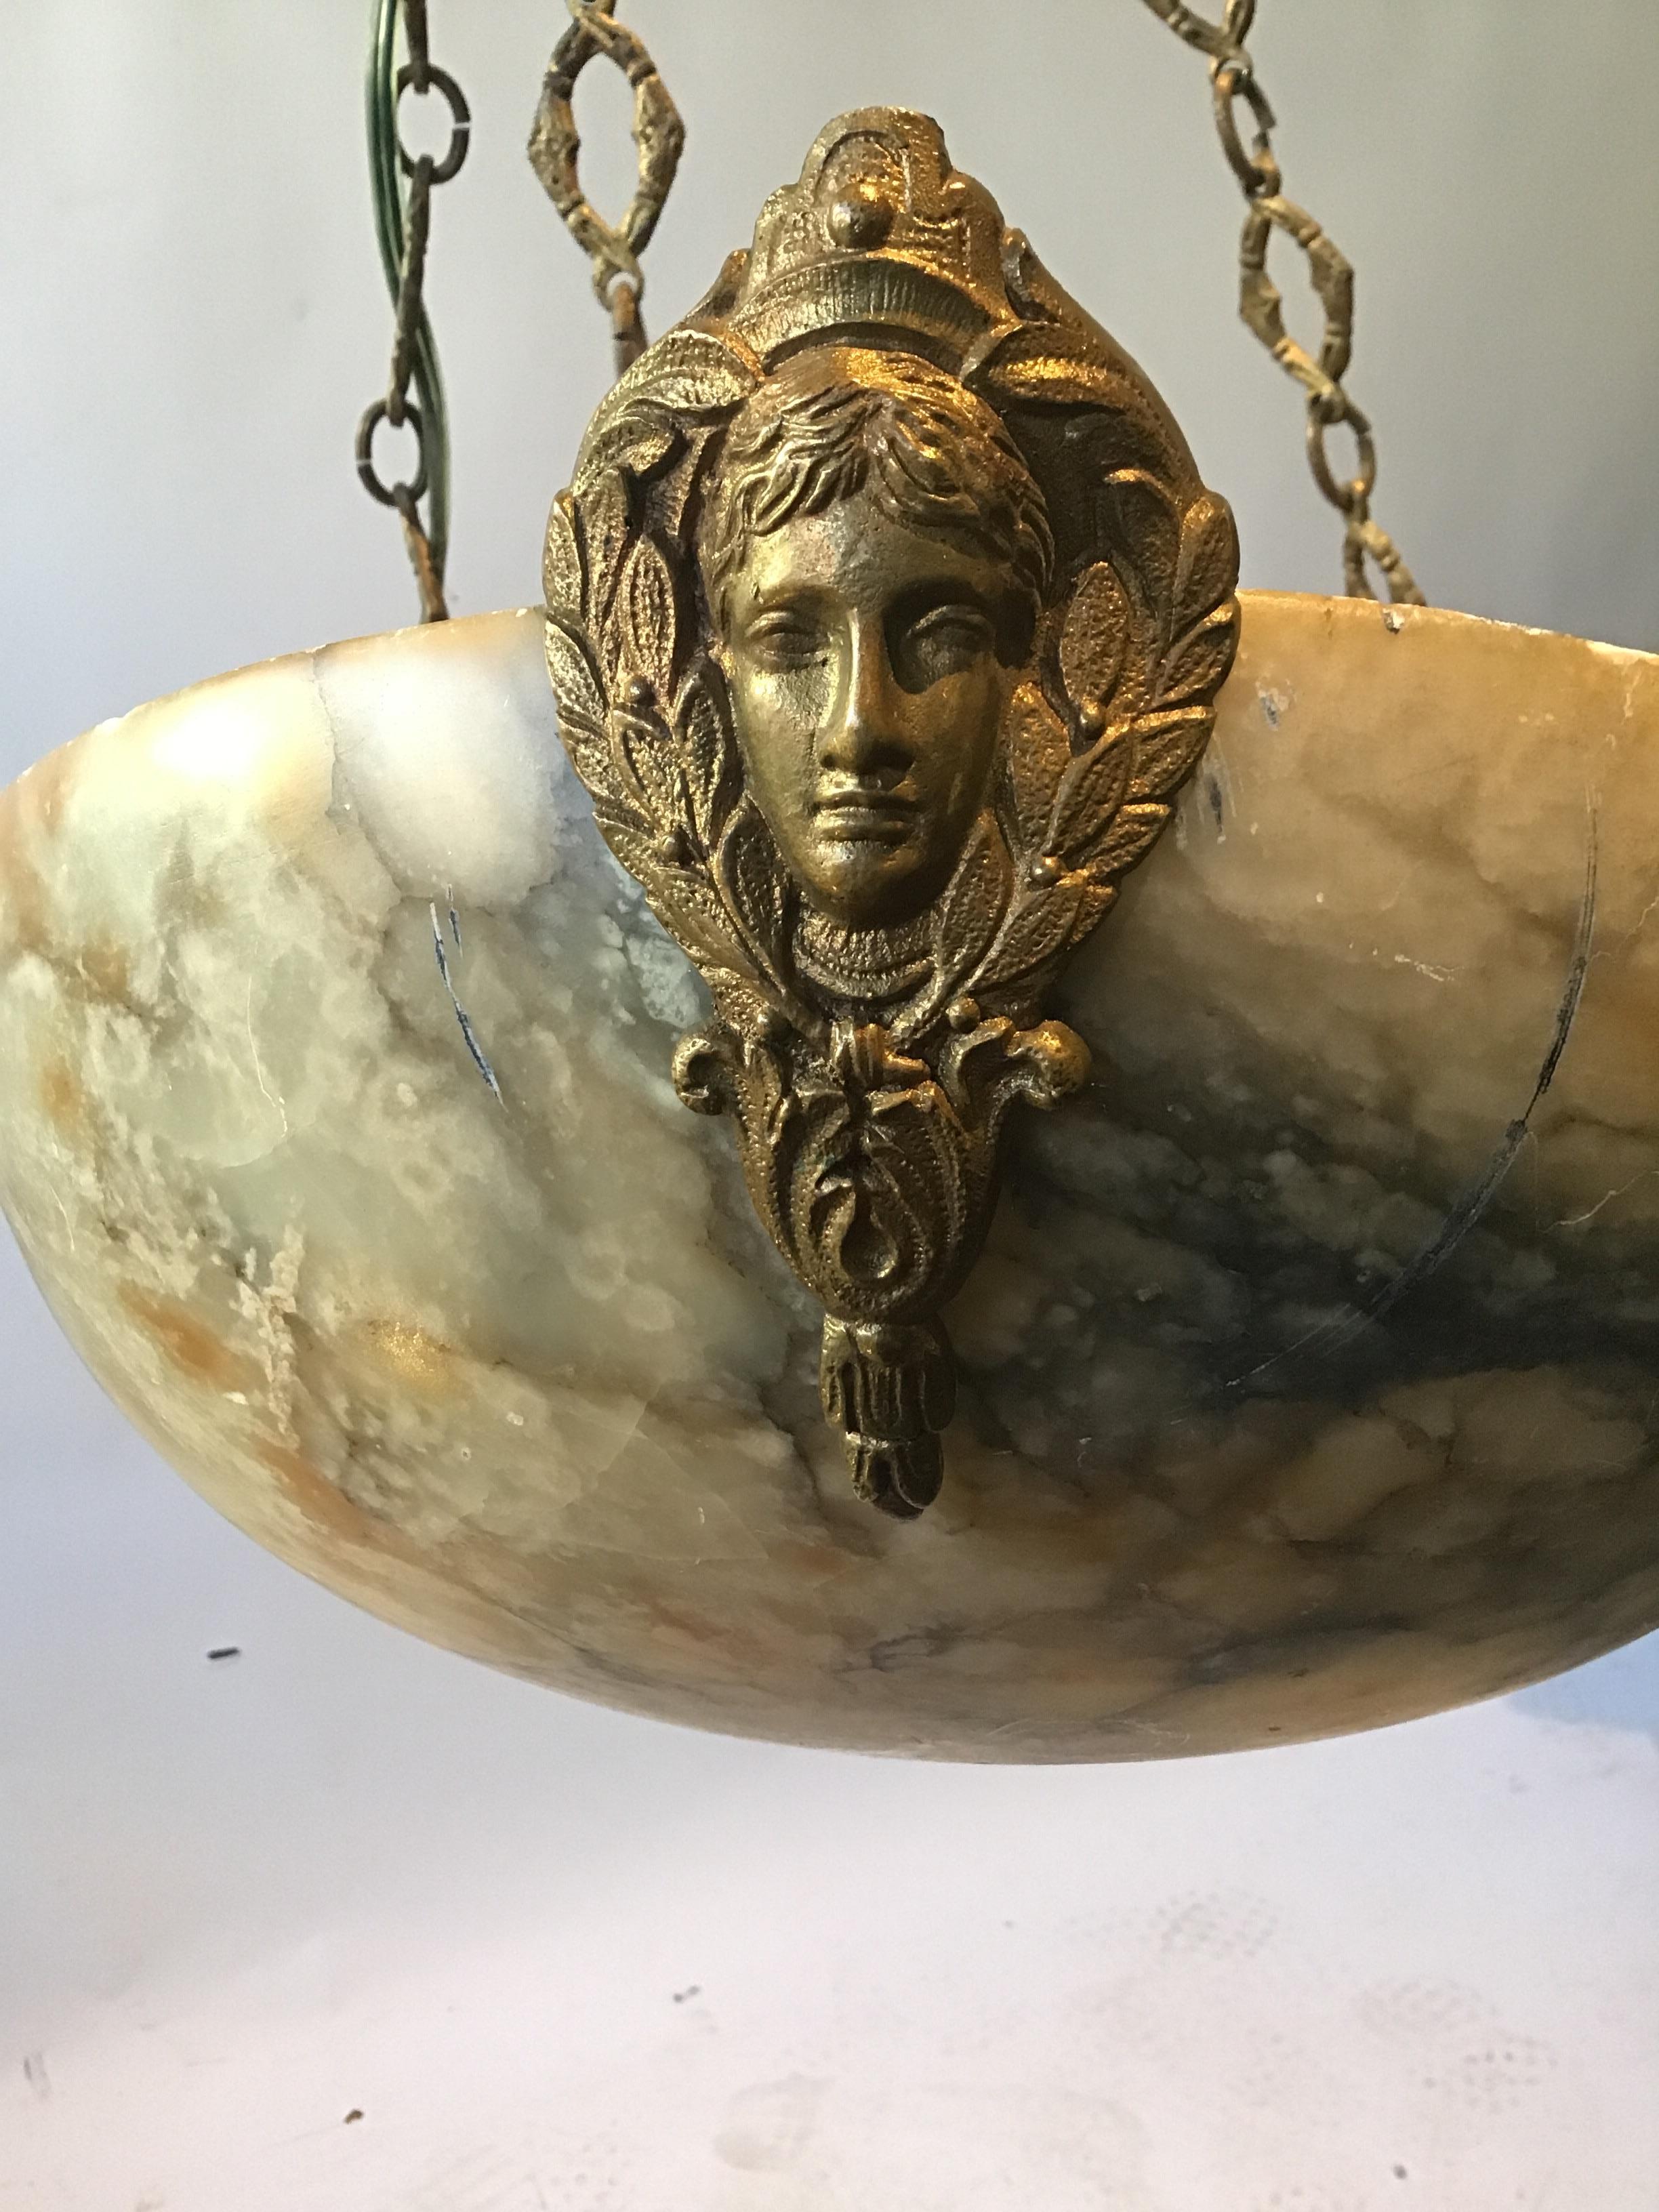 1920s French classical alabaster fixture with brass ornaments.
This item can easily be shipped via UPS.